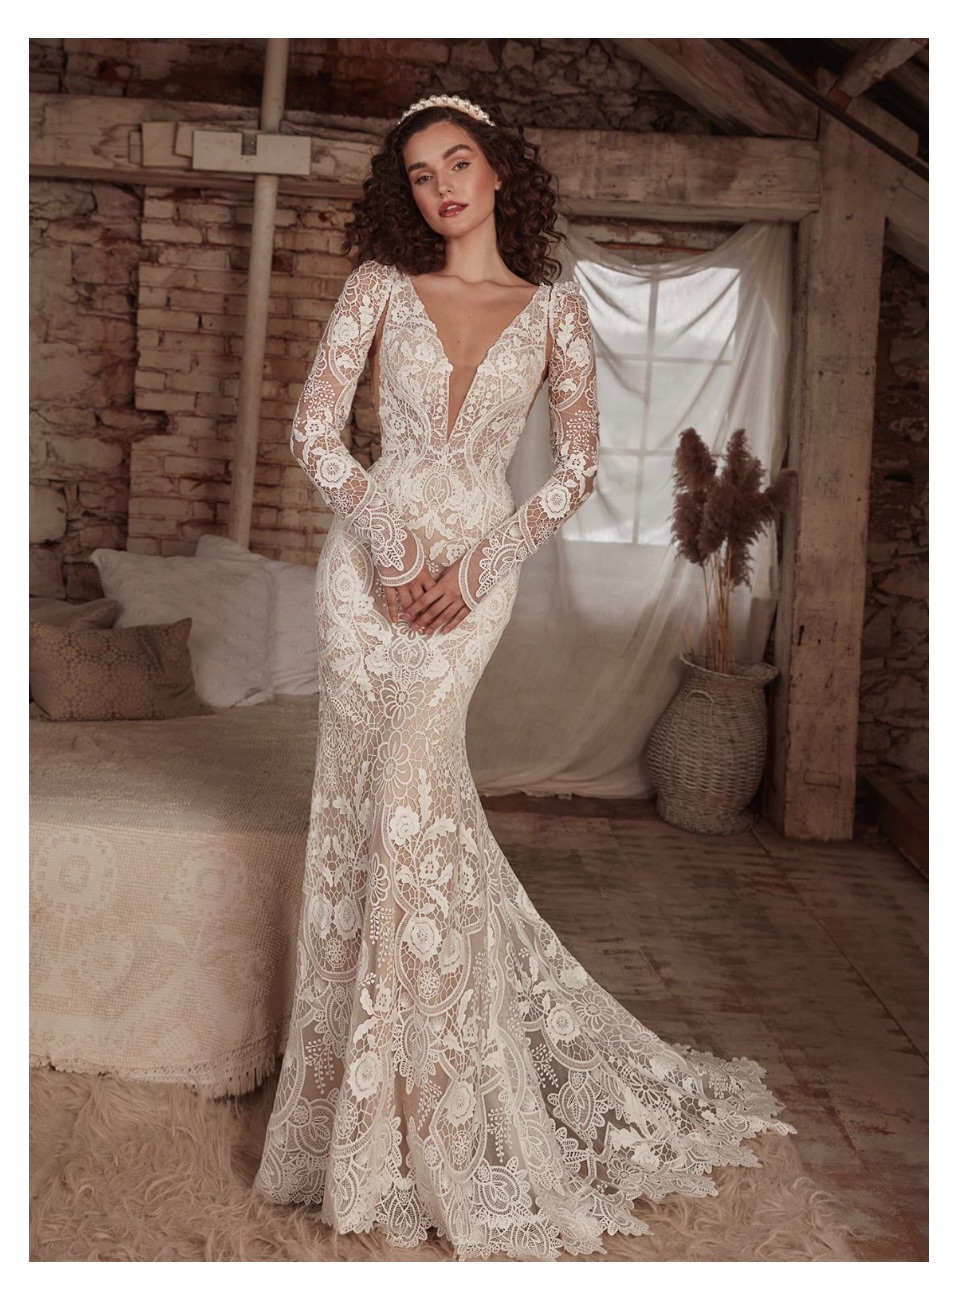 Receive a 10% off new  dresses discount as a UKbride member